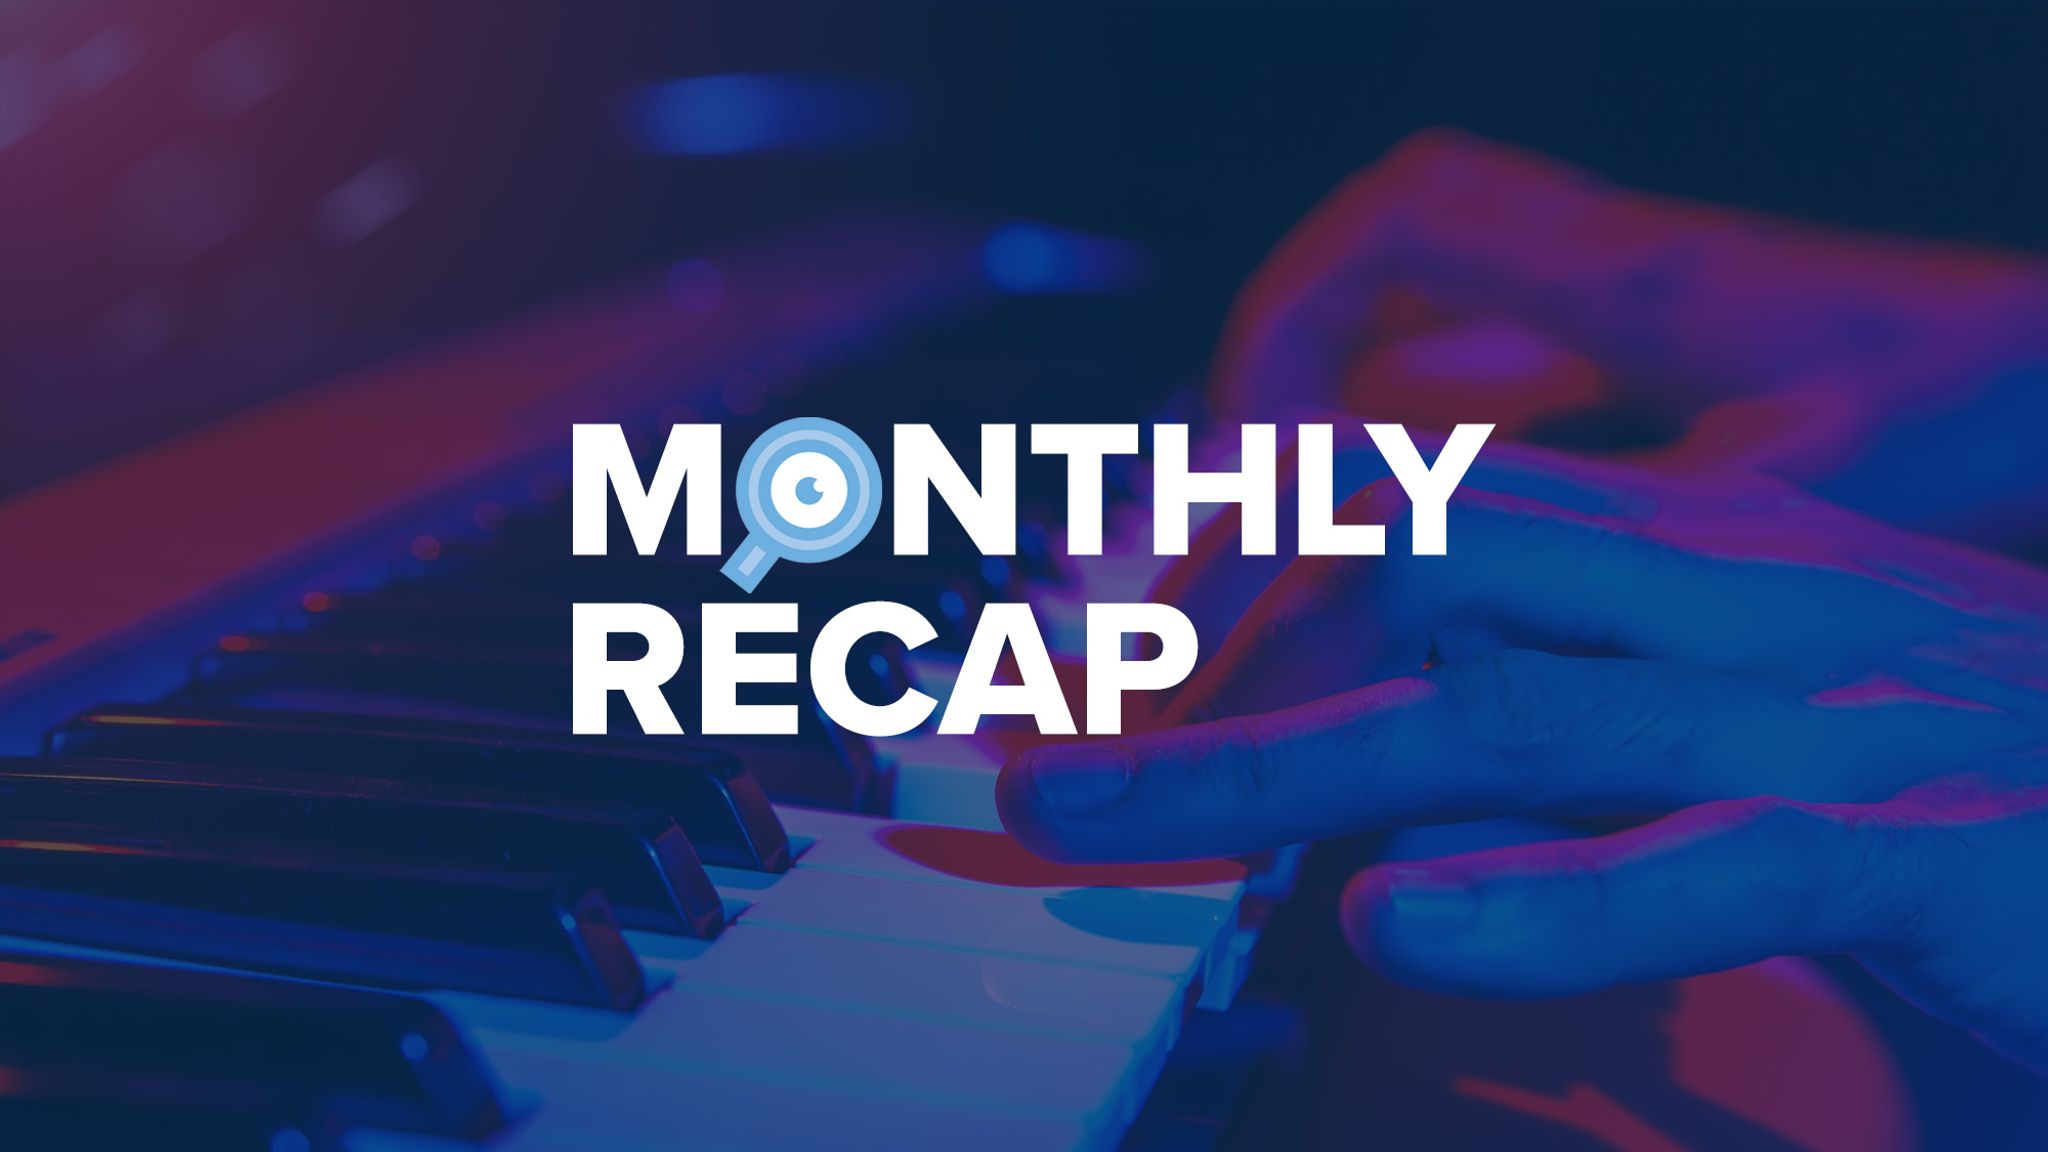 CMS Critic Monthly Recap image with piano background